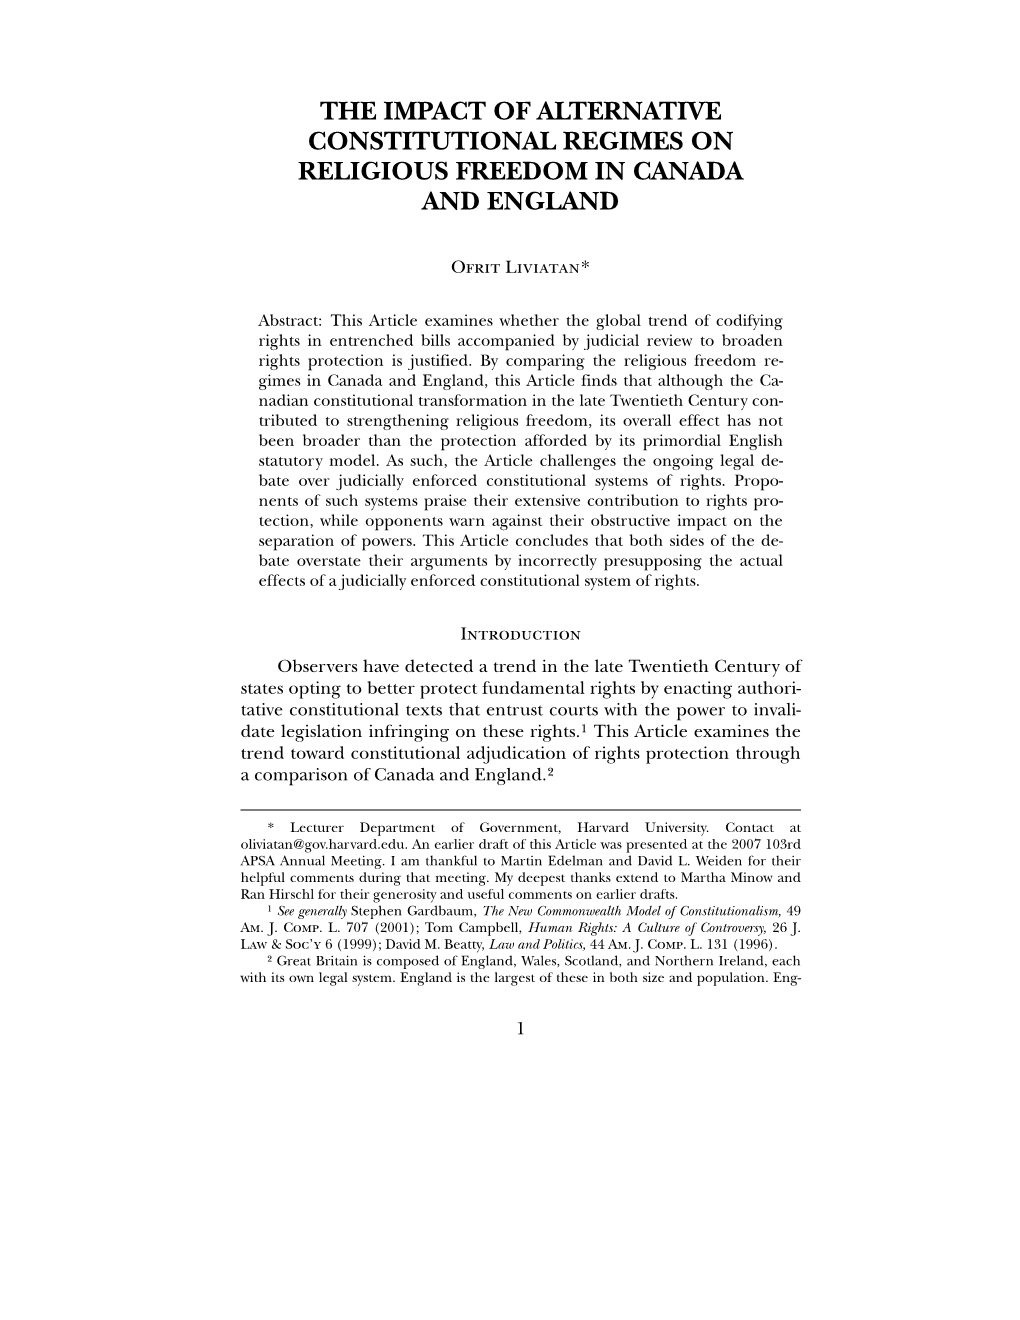 The Impact of Alternative Constitutional Regimes on Religious Freedom in Canada and England